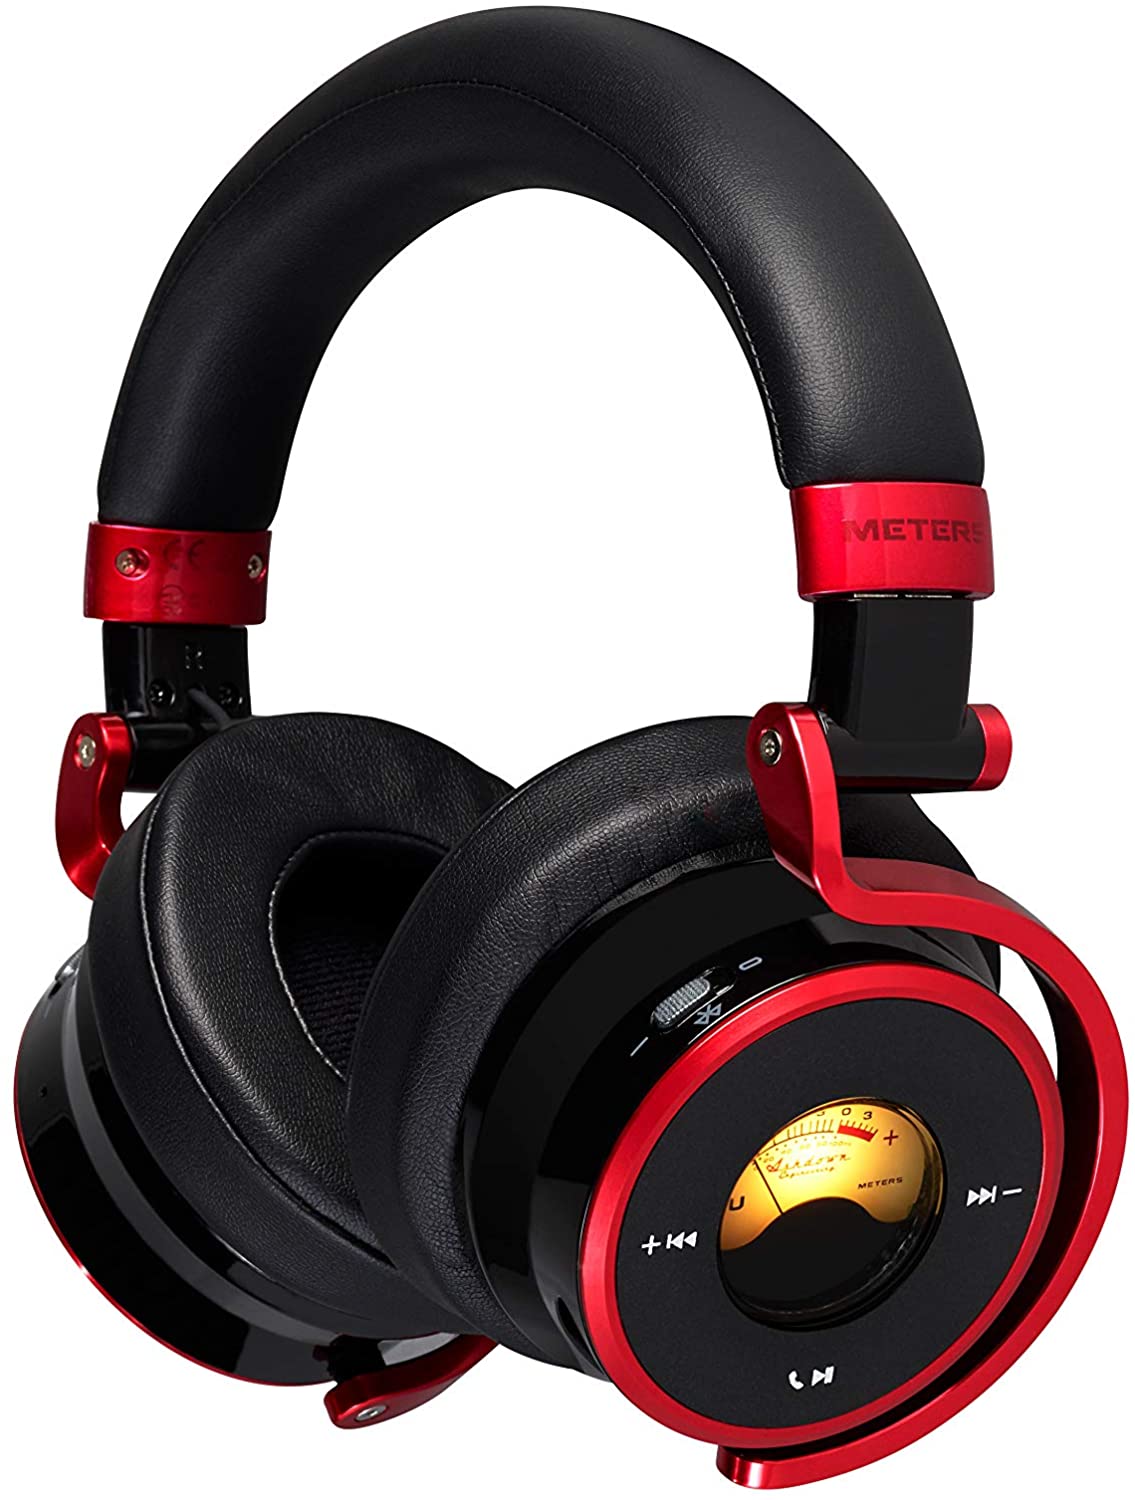 METERS OV-1-B CONNECT 7.1 Surround Rouge - Micro-casque - 3